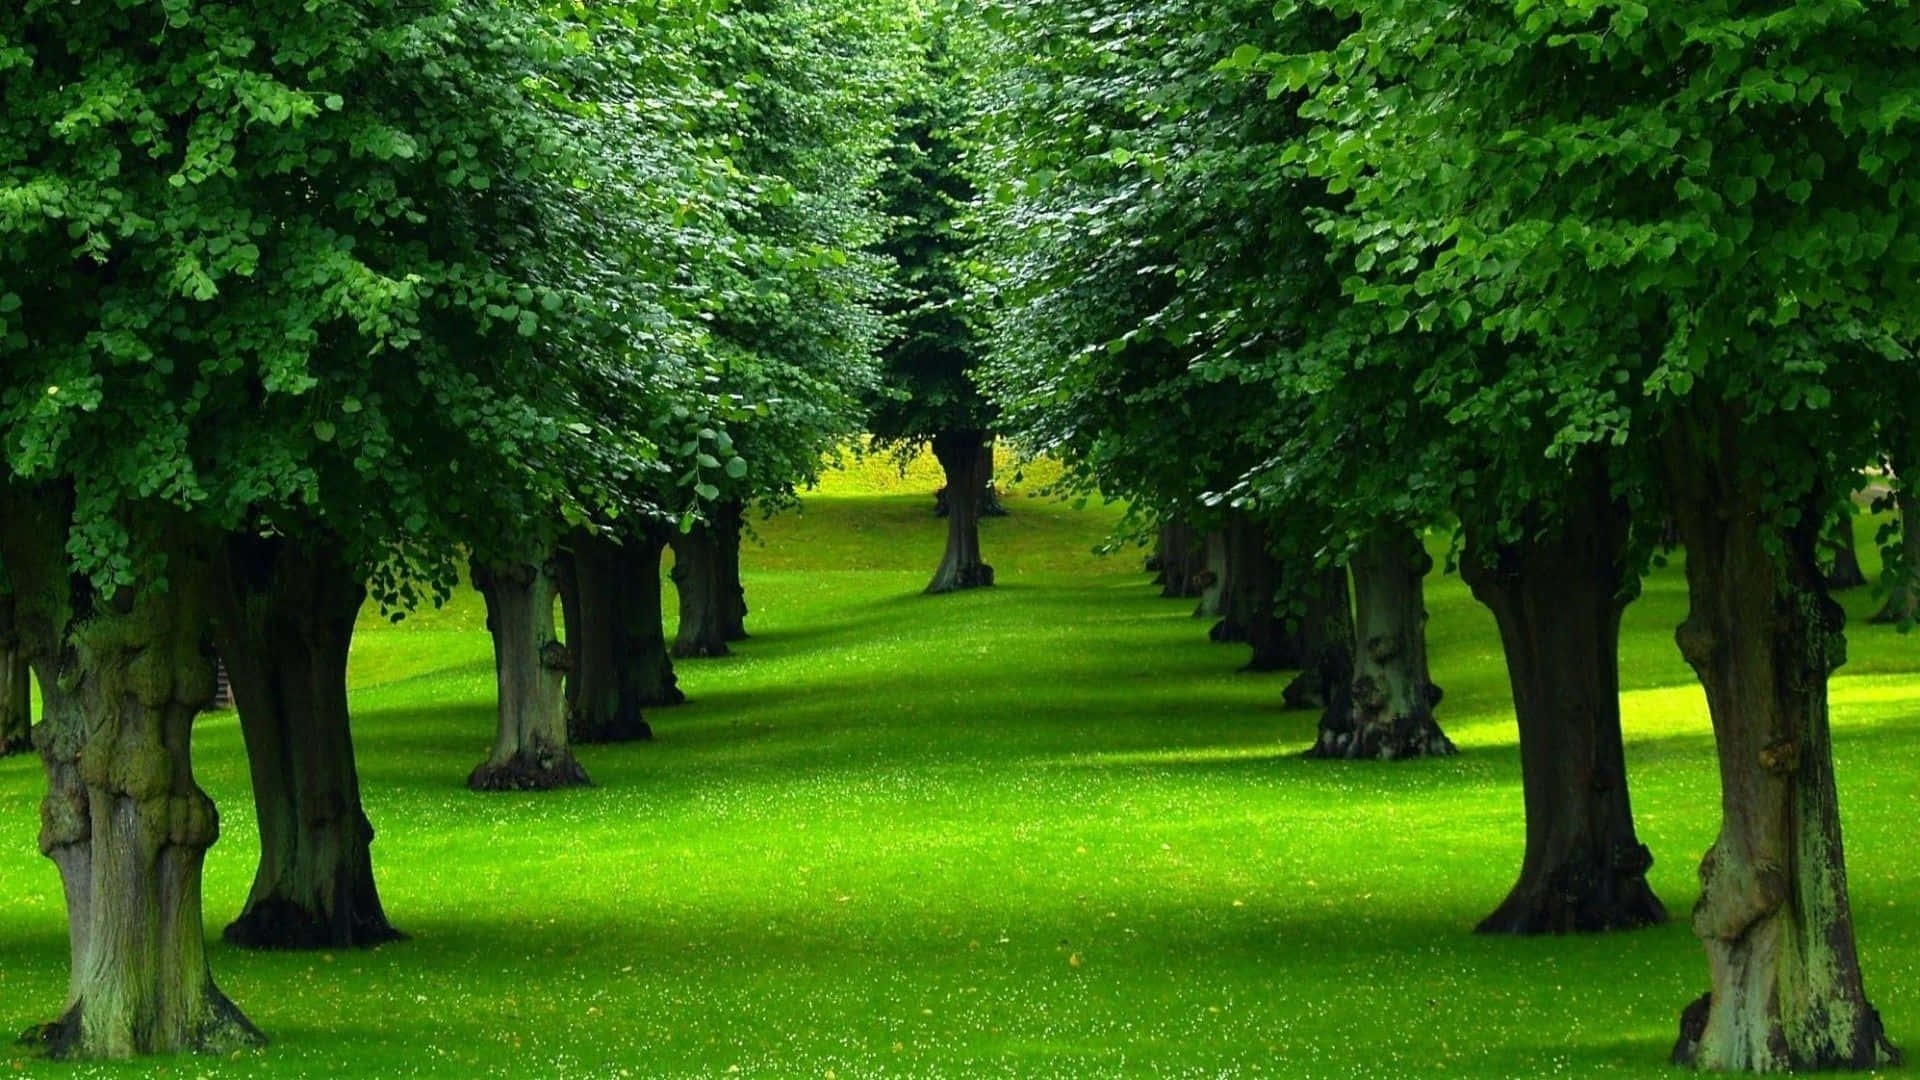 Lush greenery of tall trees in the countryside